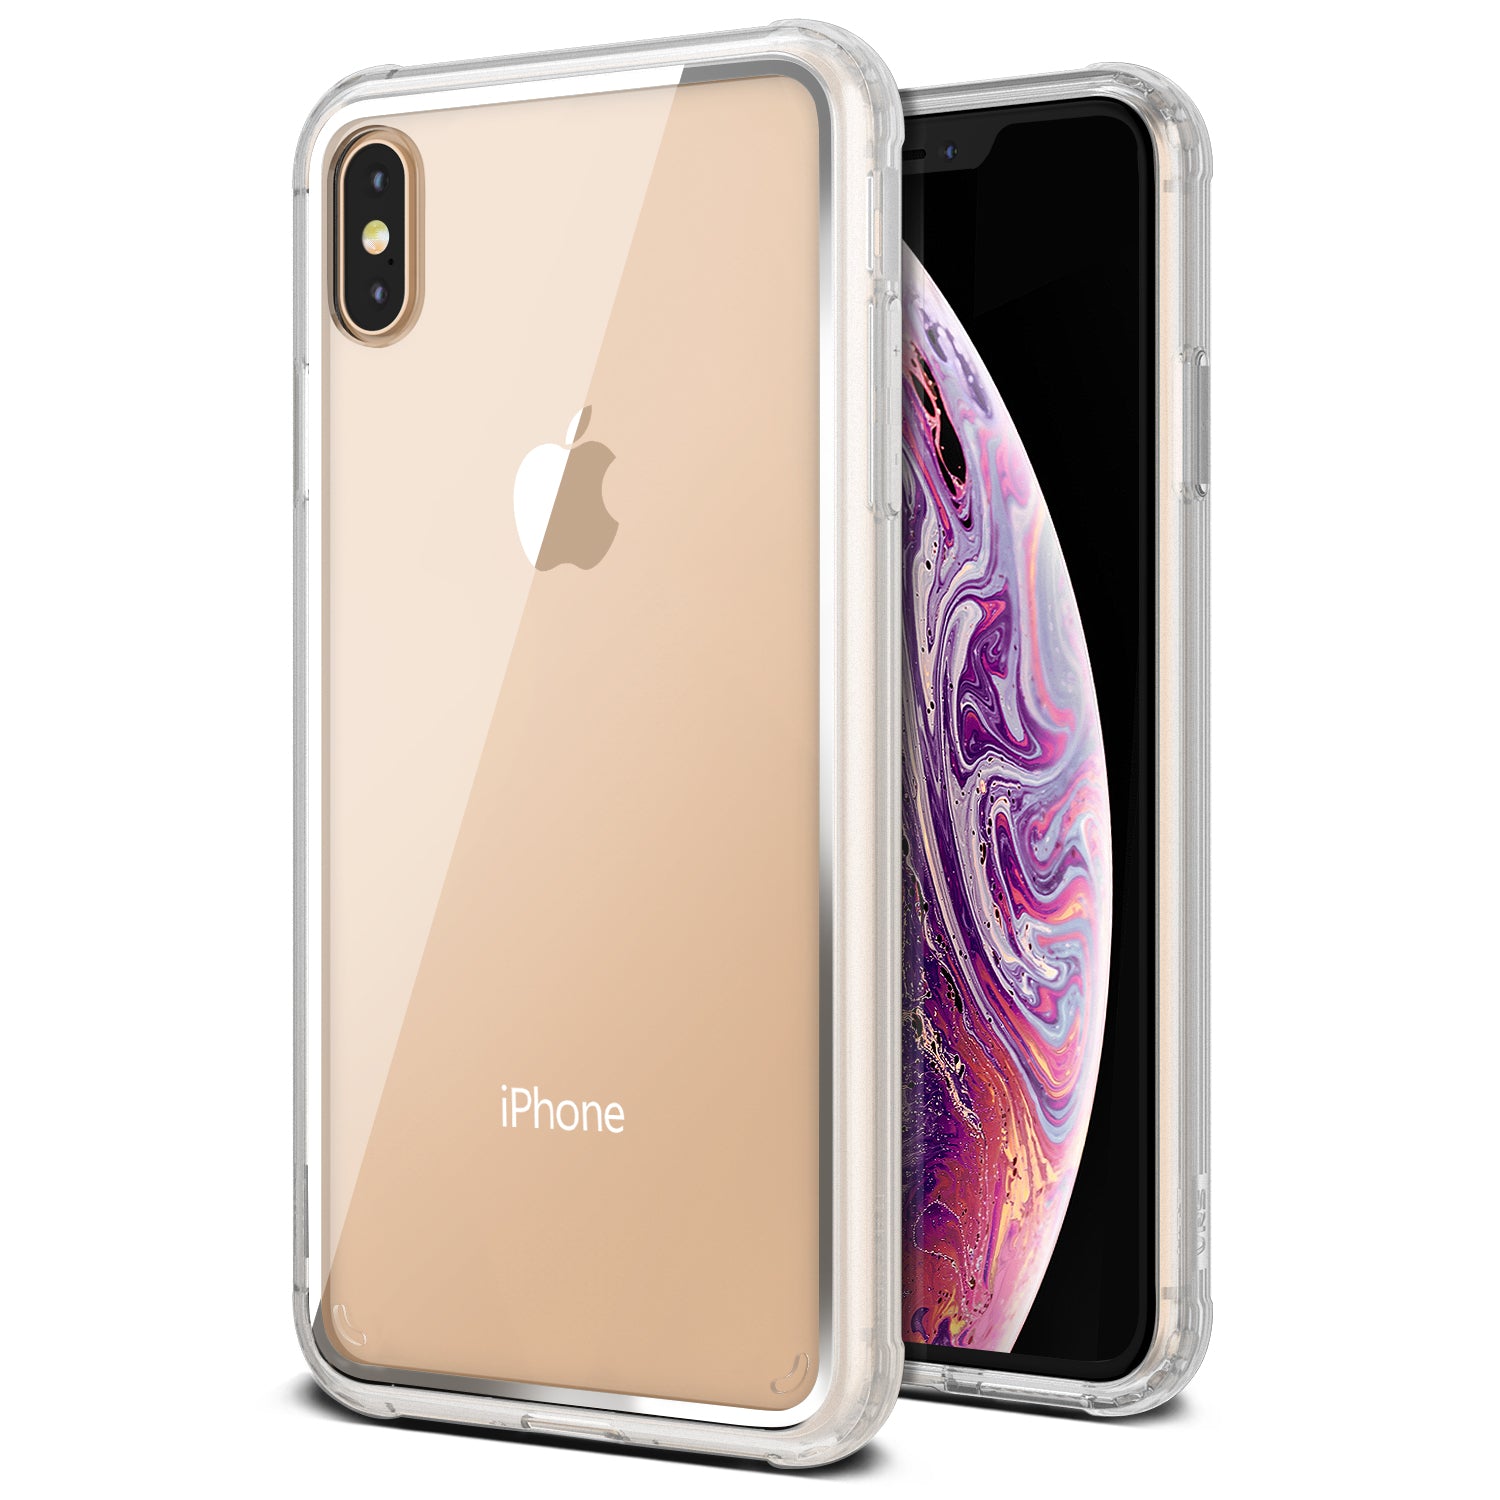 Apple Xs Max rugged Glide wallet case with multiple durable and convenient card slot with sleek minimalist look by VRS